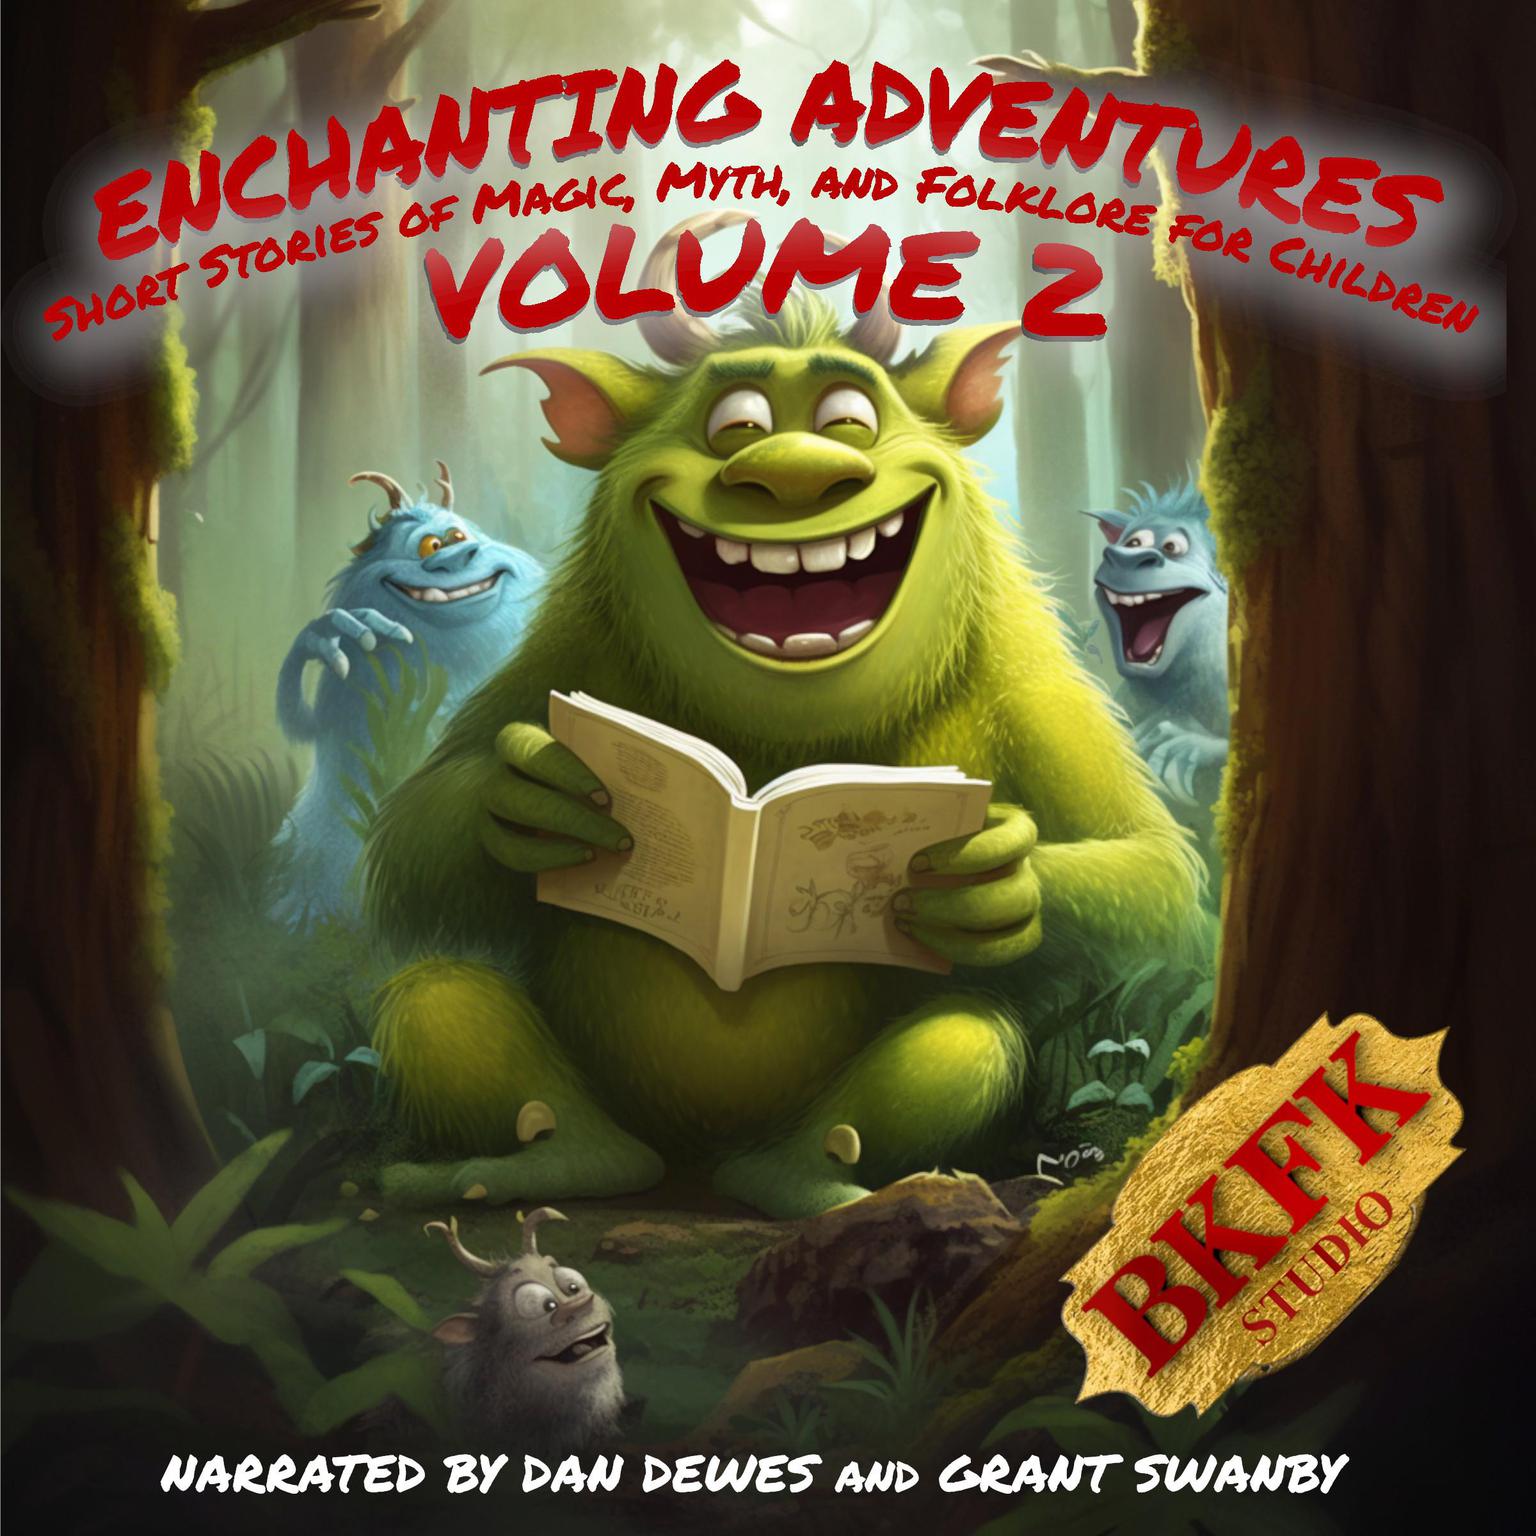 Enchanting Adventures: Short Stories of Magic, Myth, and Folklore for Children - Volume 2 Audiobook, by BKFK Studio